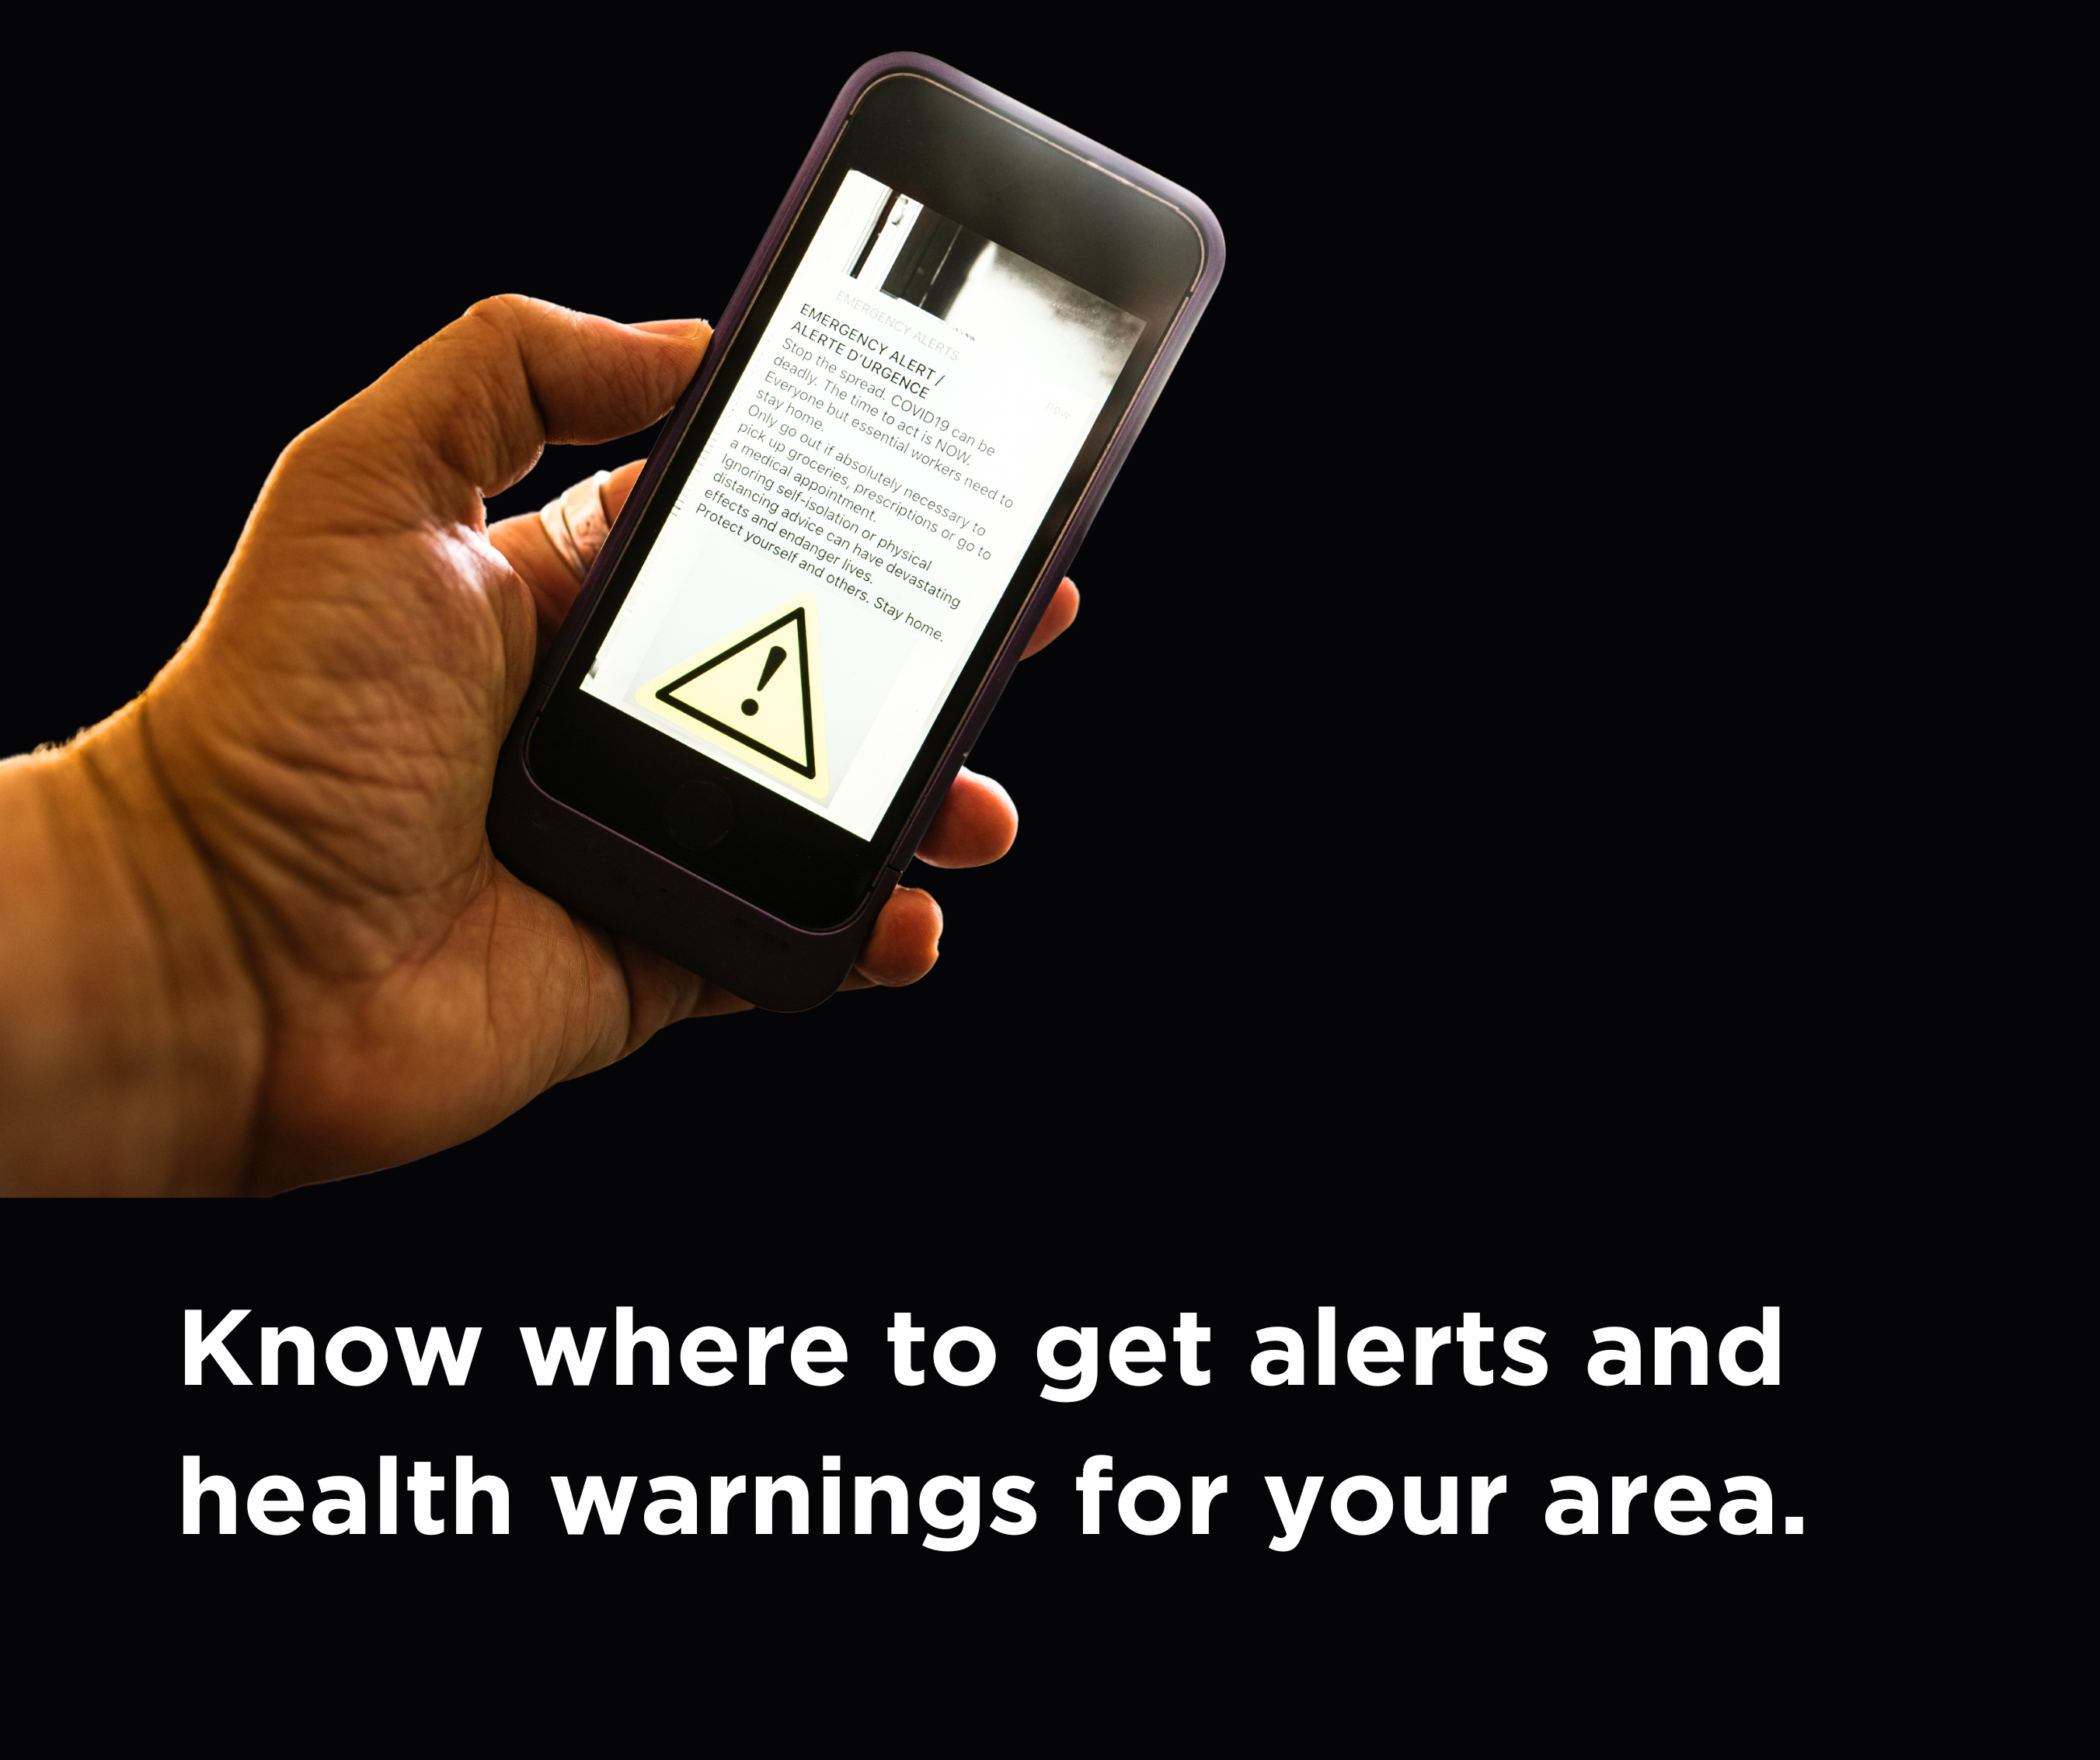 Closeup of hand holding cell phone with alert on screen with caption: "Know where to get alerts and health warnings for your area